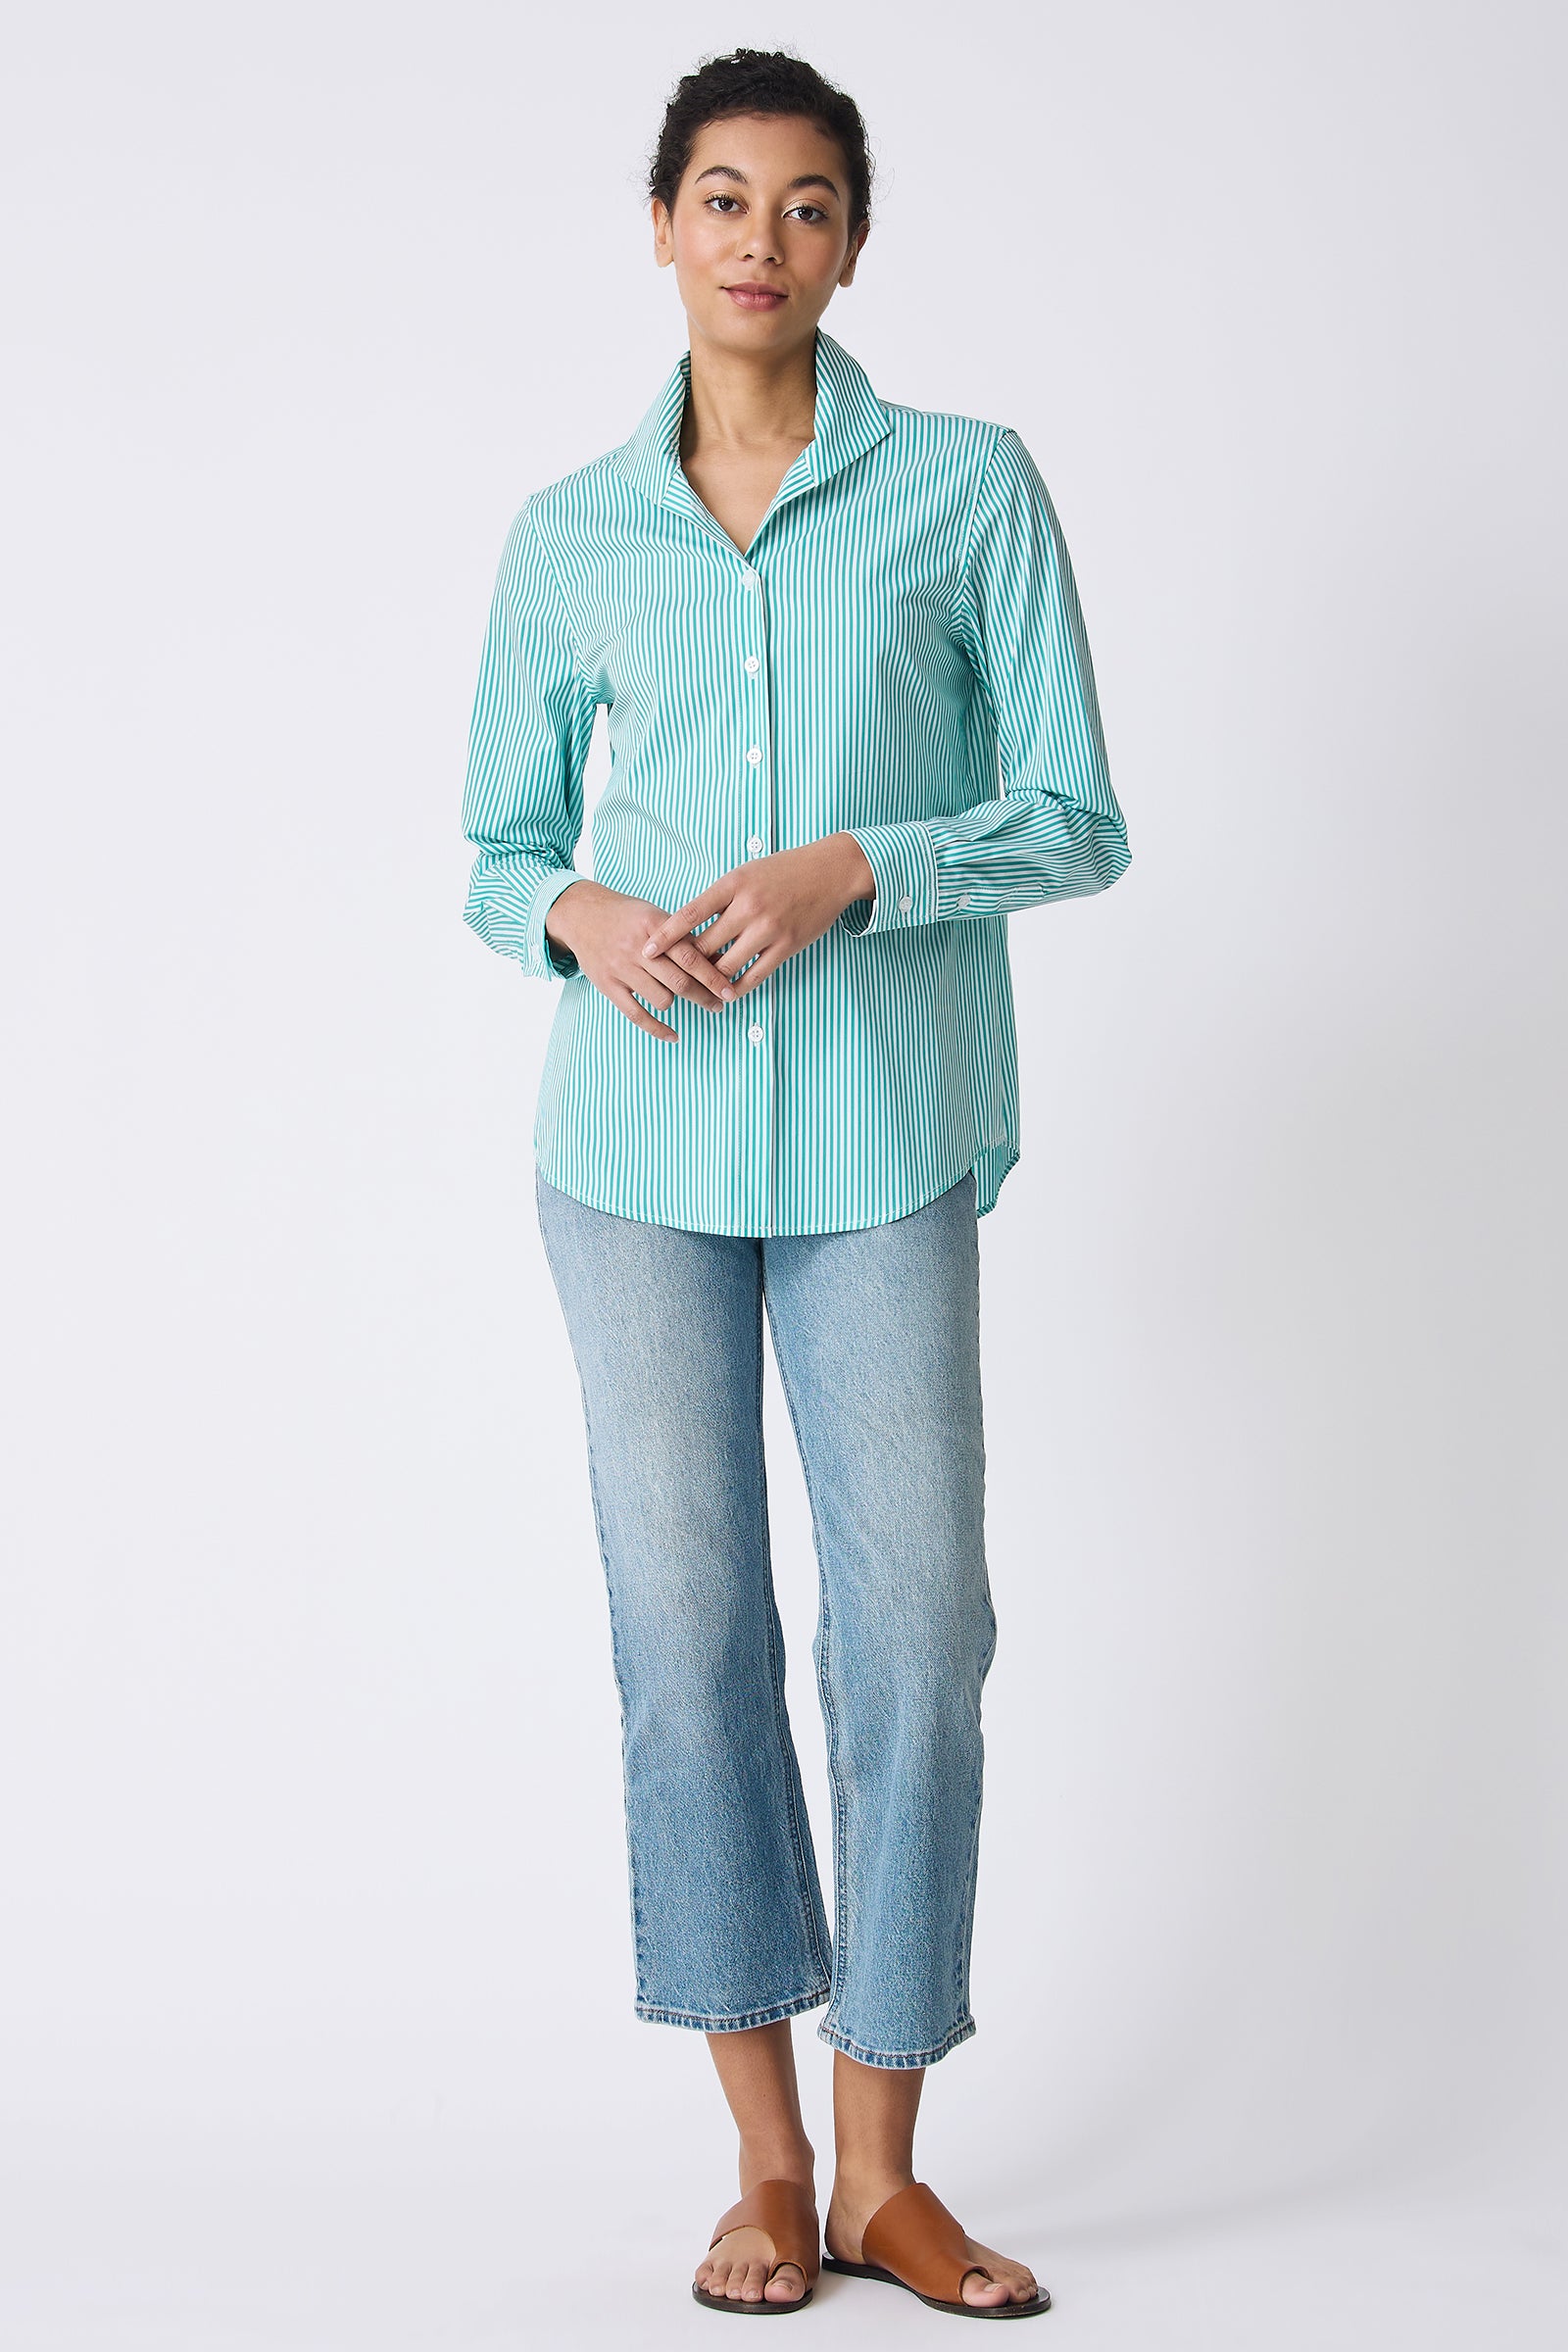 Kal Rieman image of the Ginna Box Pleat Shirt in Miami Stripe Green on model full front view alternate